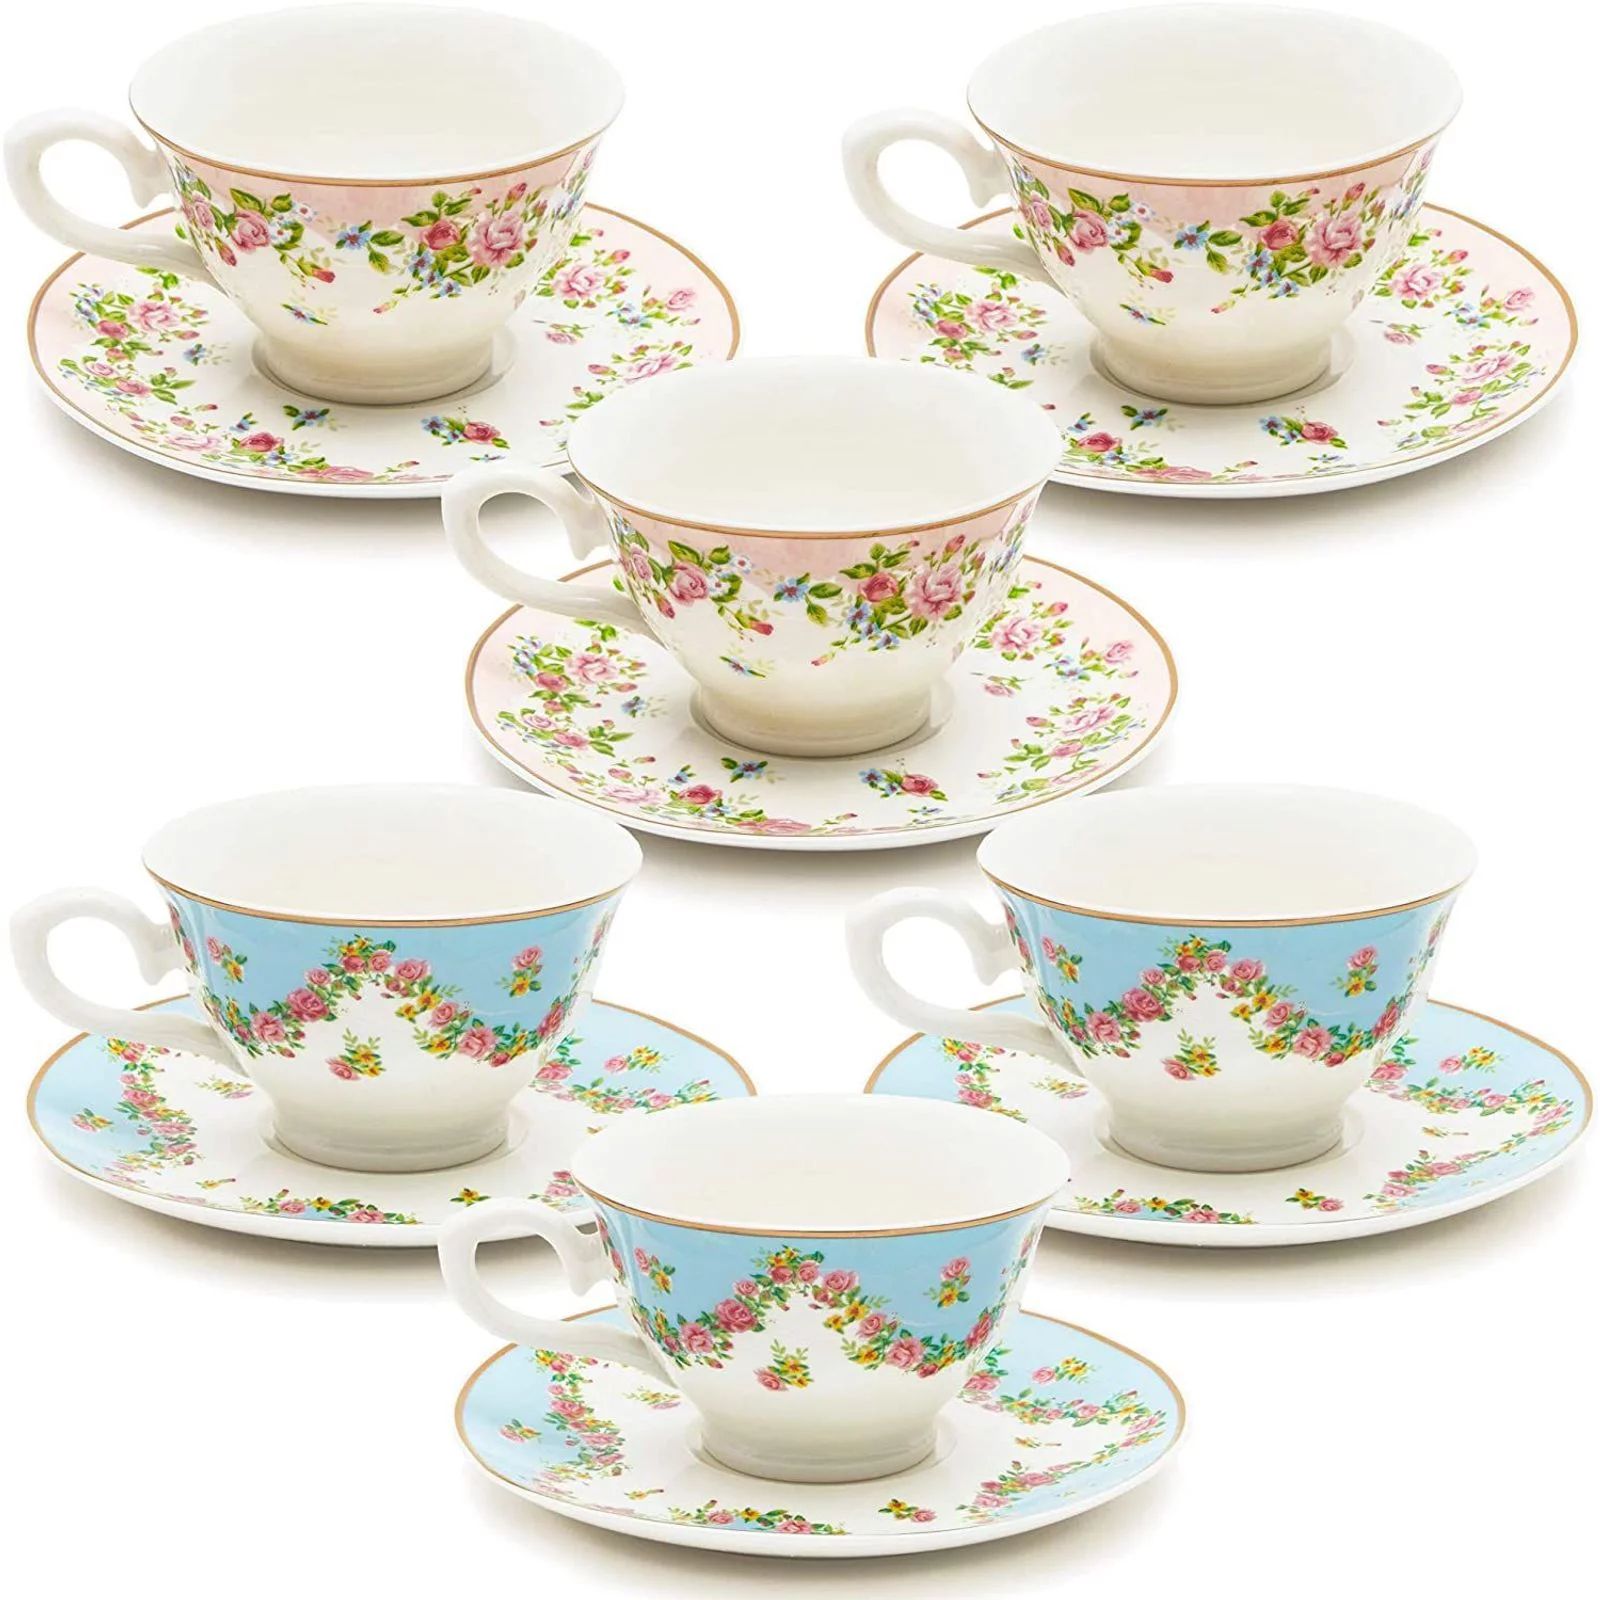 Set of 6 Vintage Floral Tea Cups and Saucers for Tea Party Supplies, Blue, Pink, 8oz | Walmart (US)